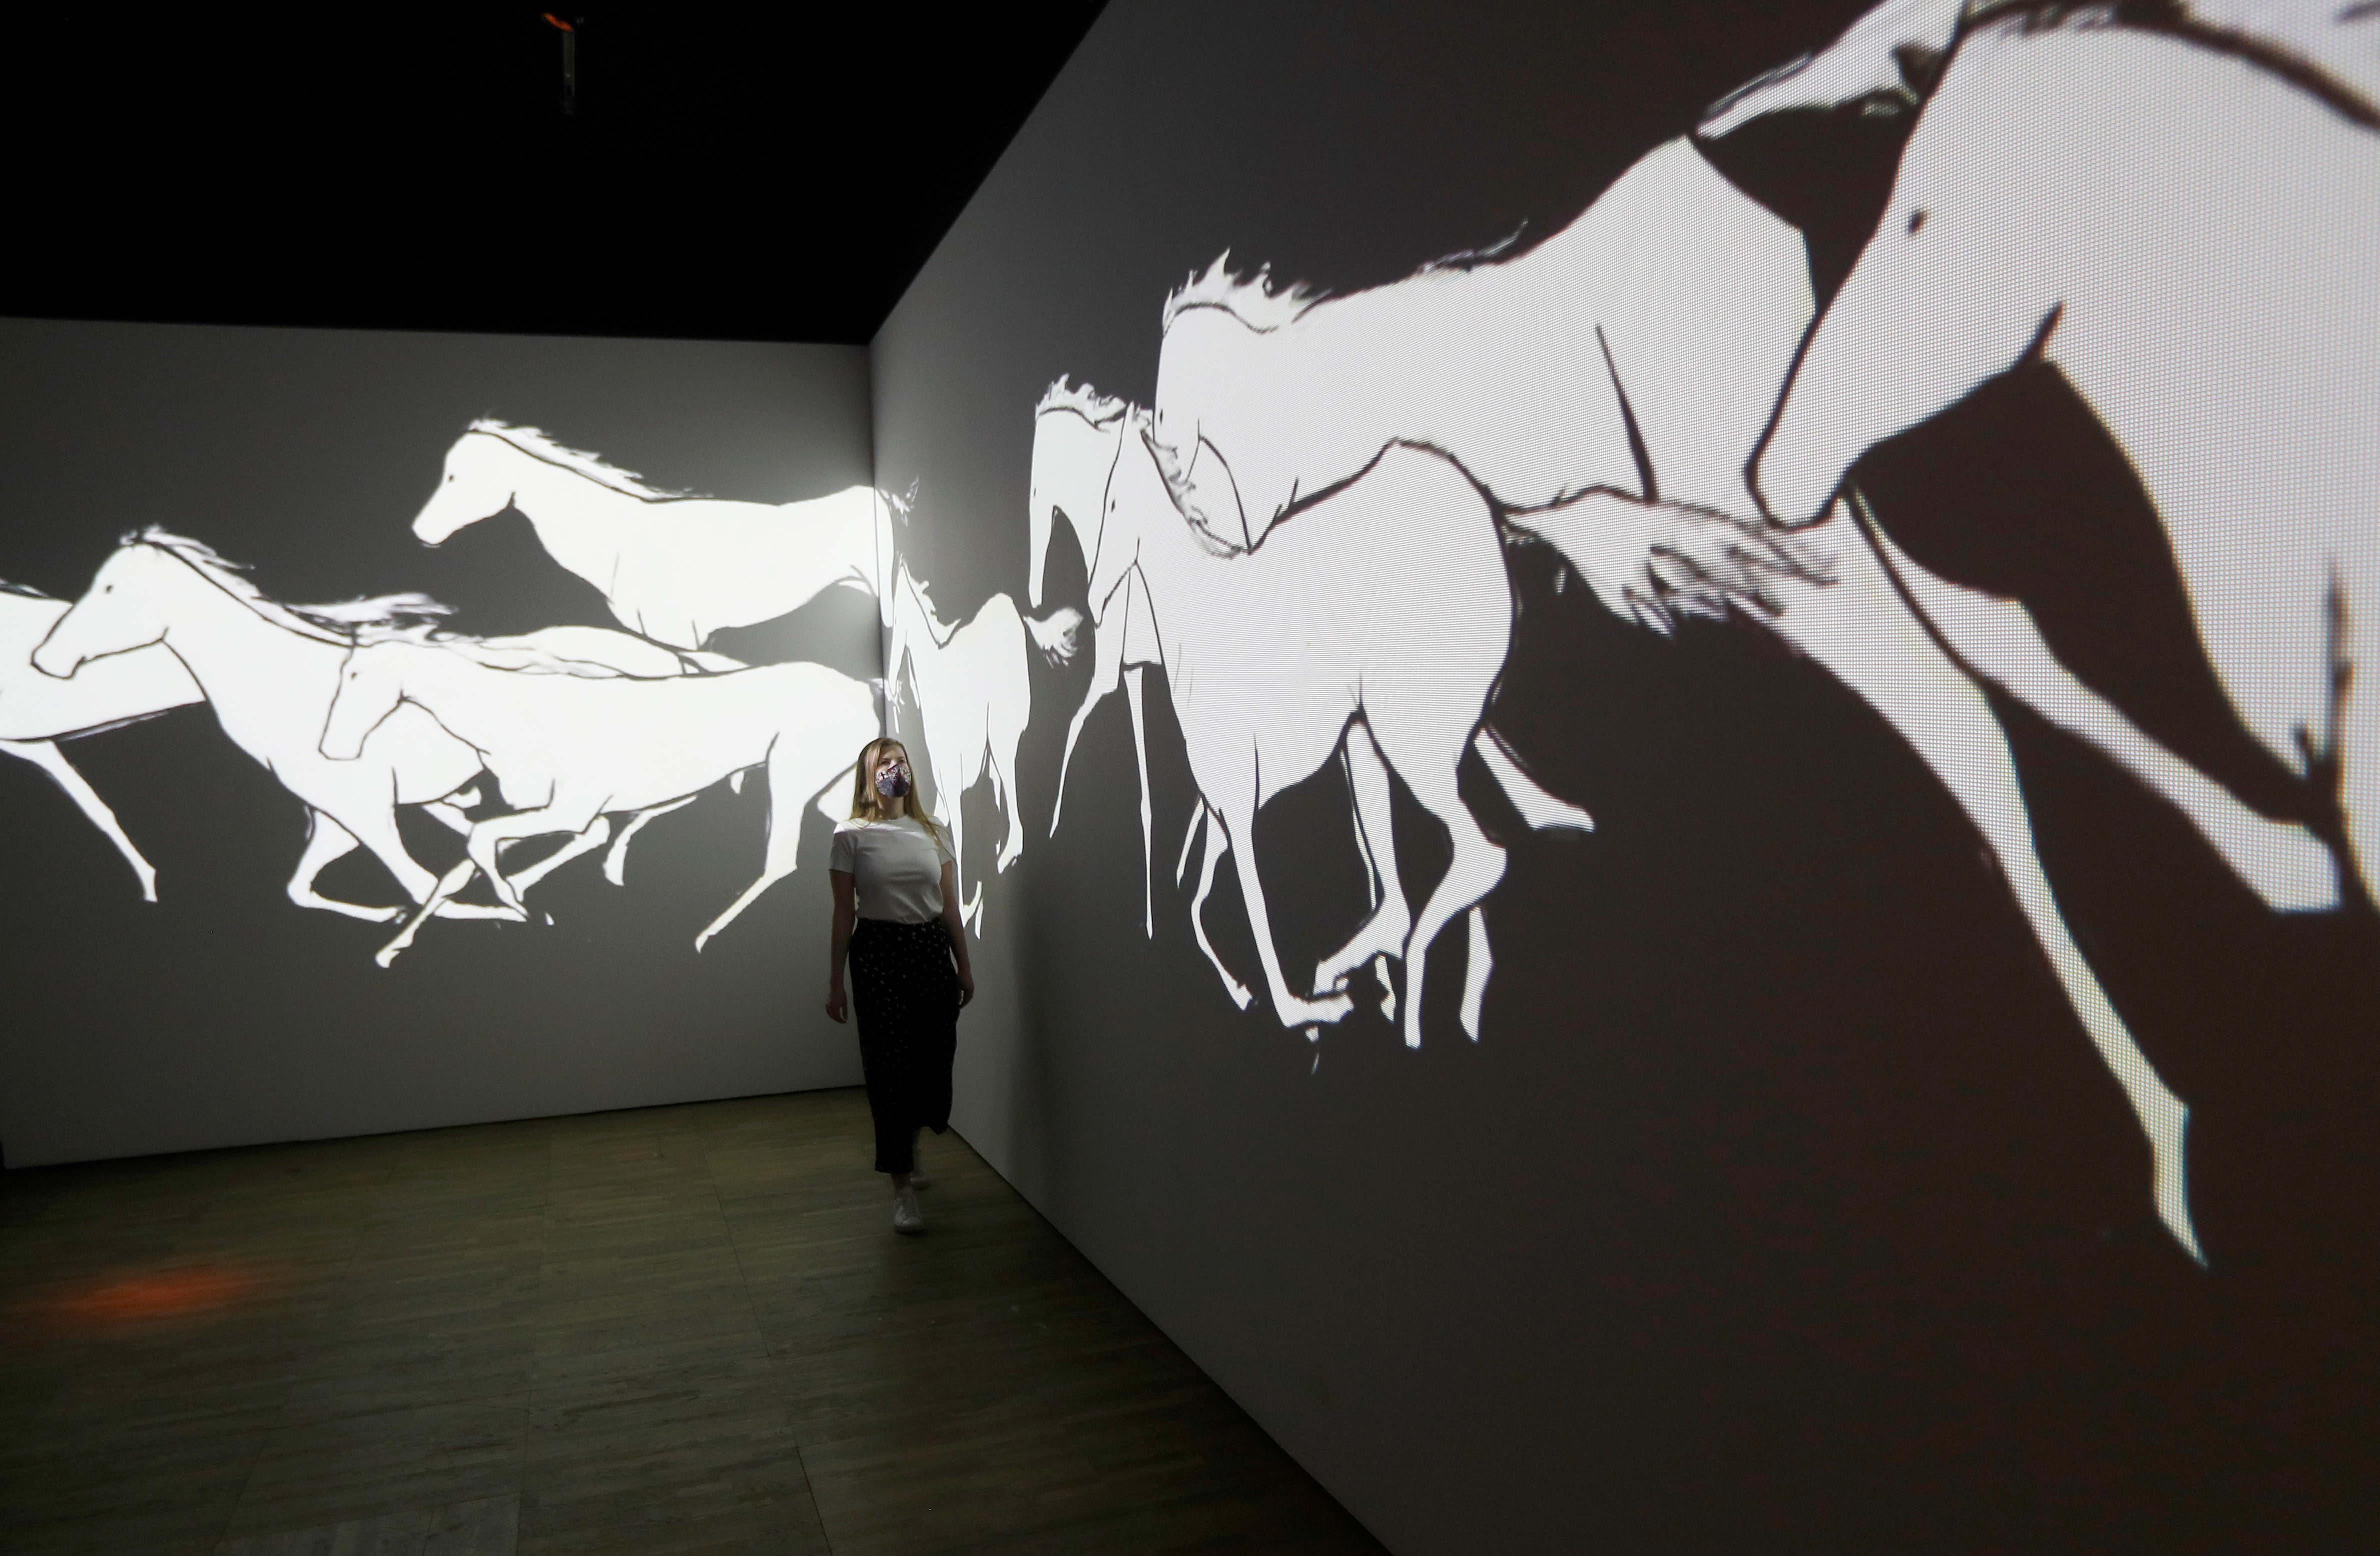 A V&A employee looks at All the White Horses, a hand drawn video animation by Avish Khebrehzadeh, on display in Epic Iran, an exhibition soon to open at the V&A in London, Britain, May 25, 2021.  REUTERS/Peter Nicholls